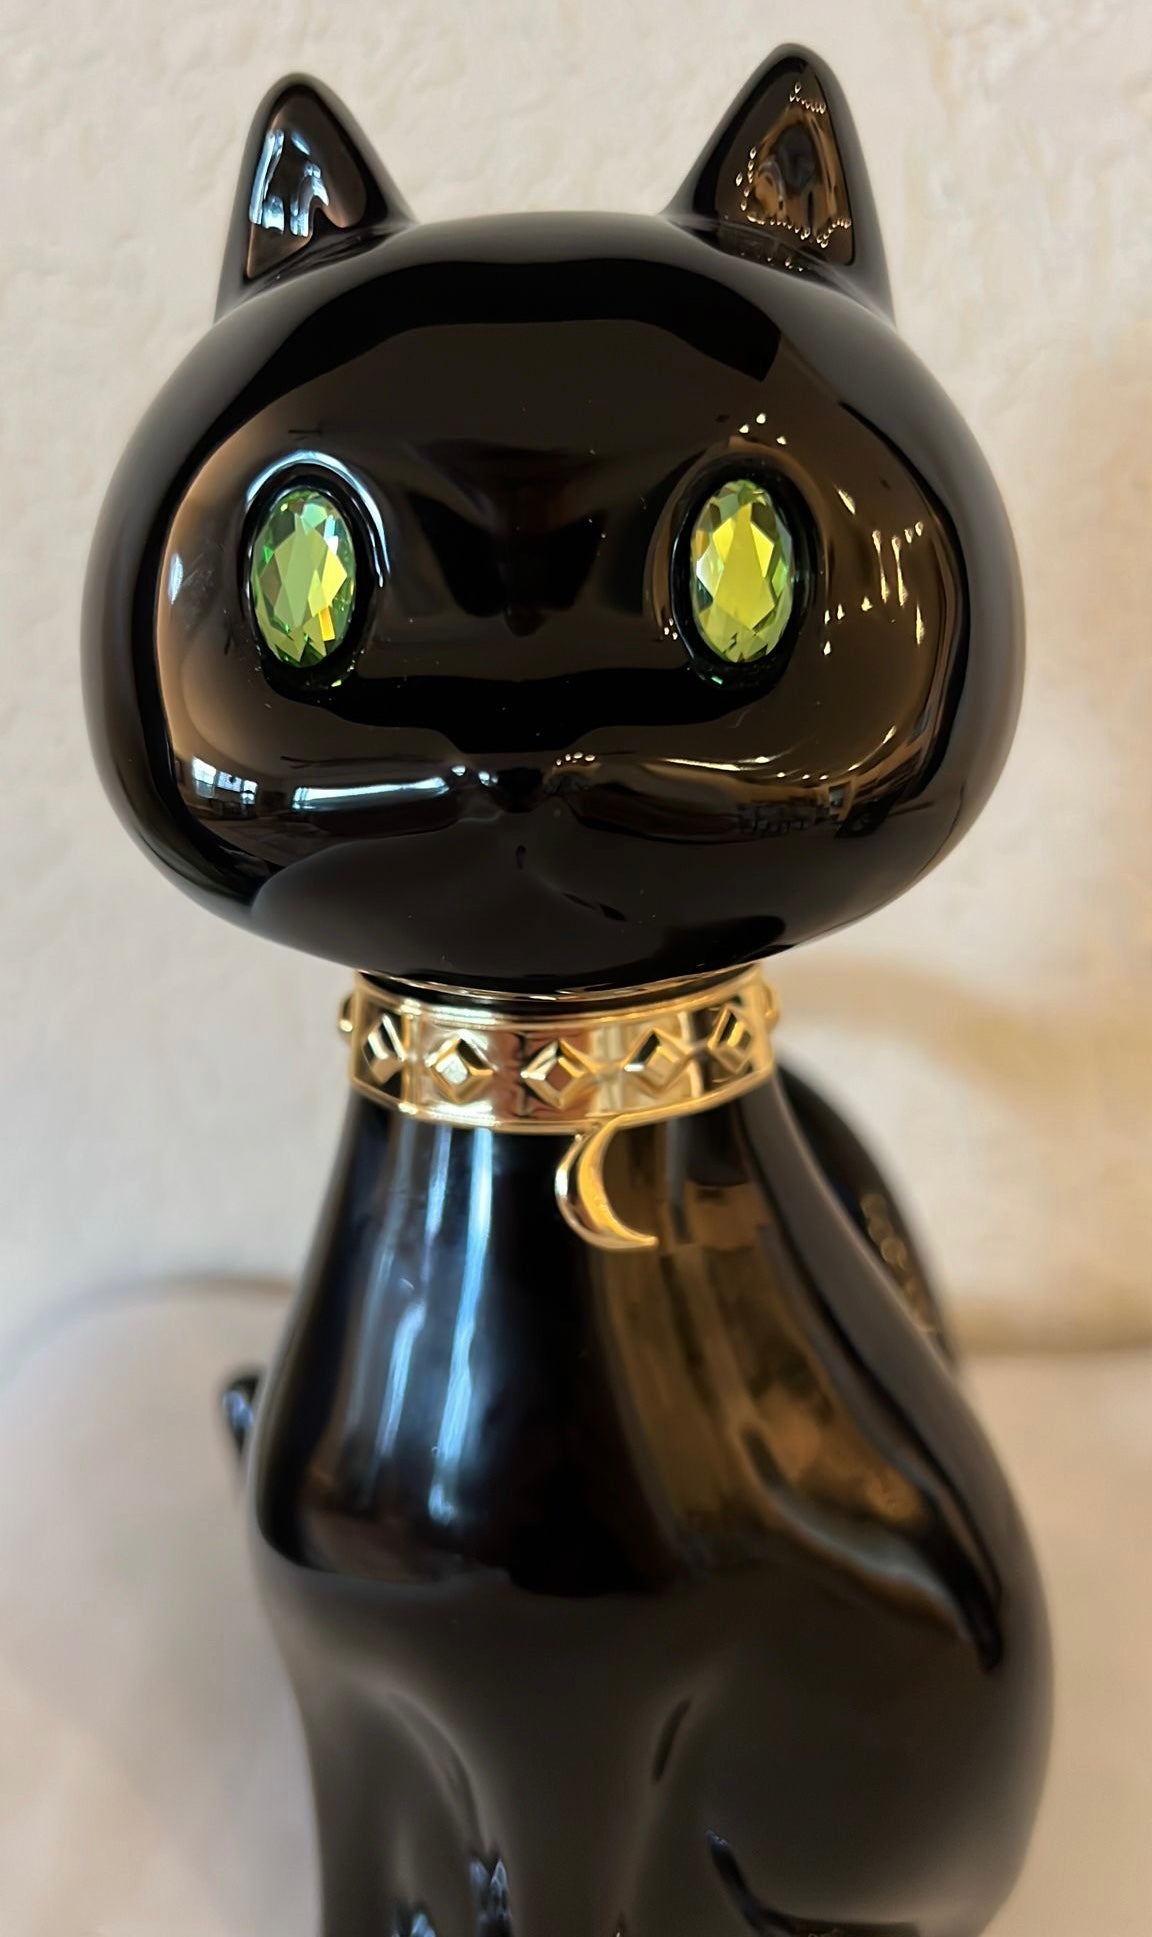 Bath and Body Works 2022 Halloween Black Cat For Single Wick Candle Holder New